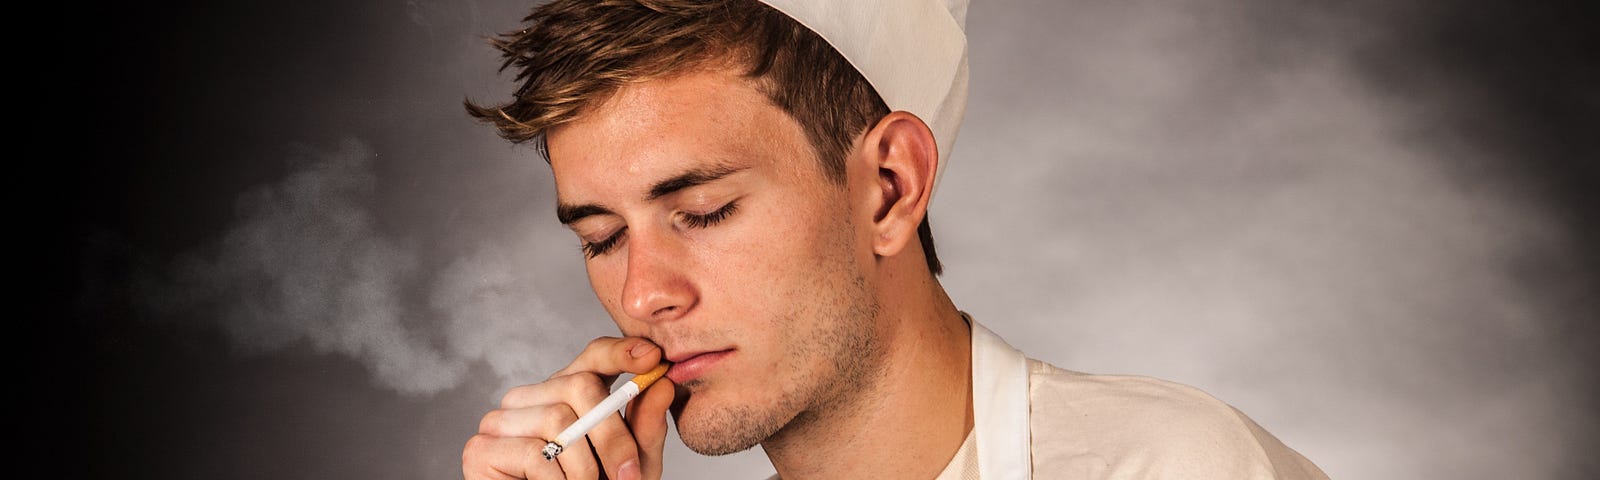 A male cook with a chef’s cap smoking a cigarette.